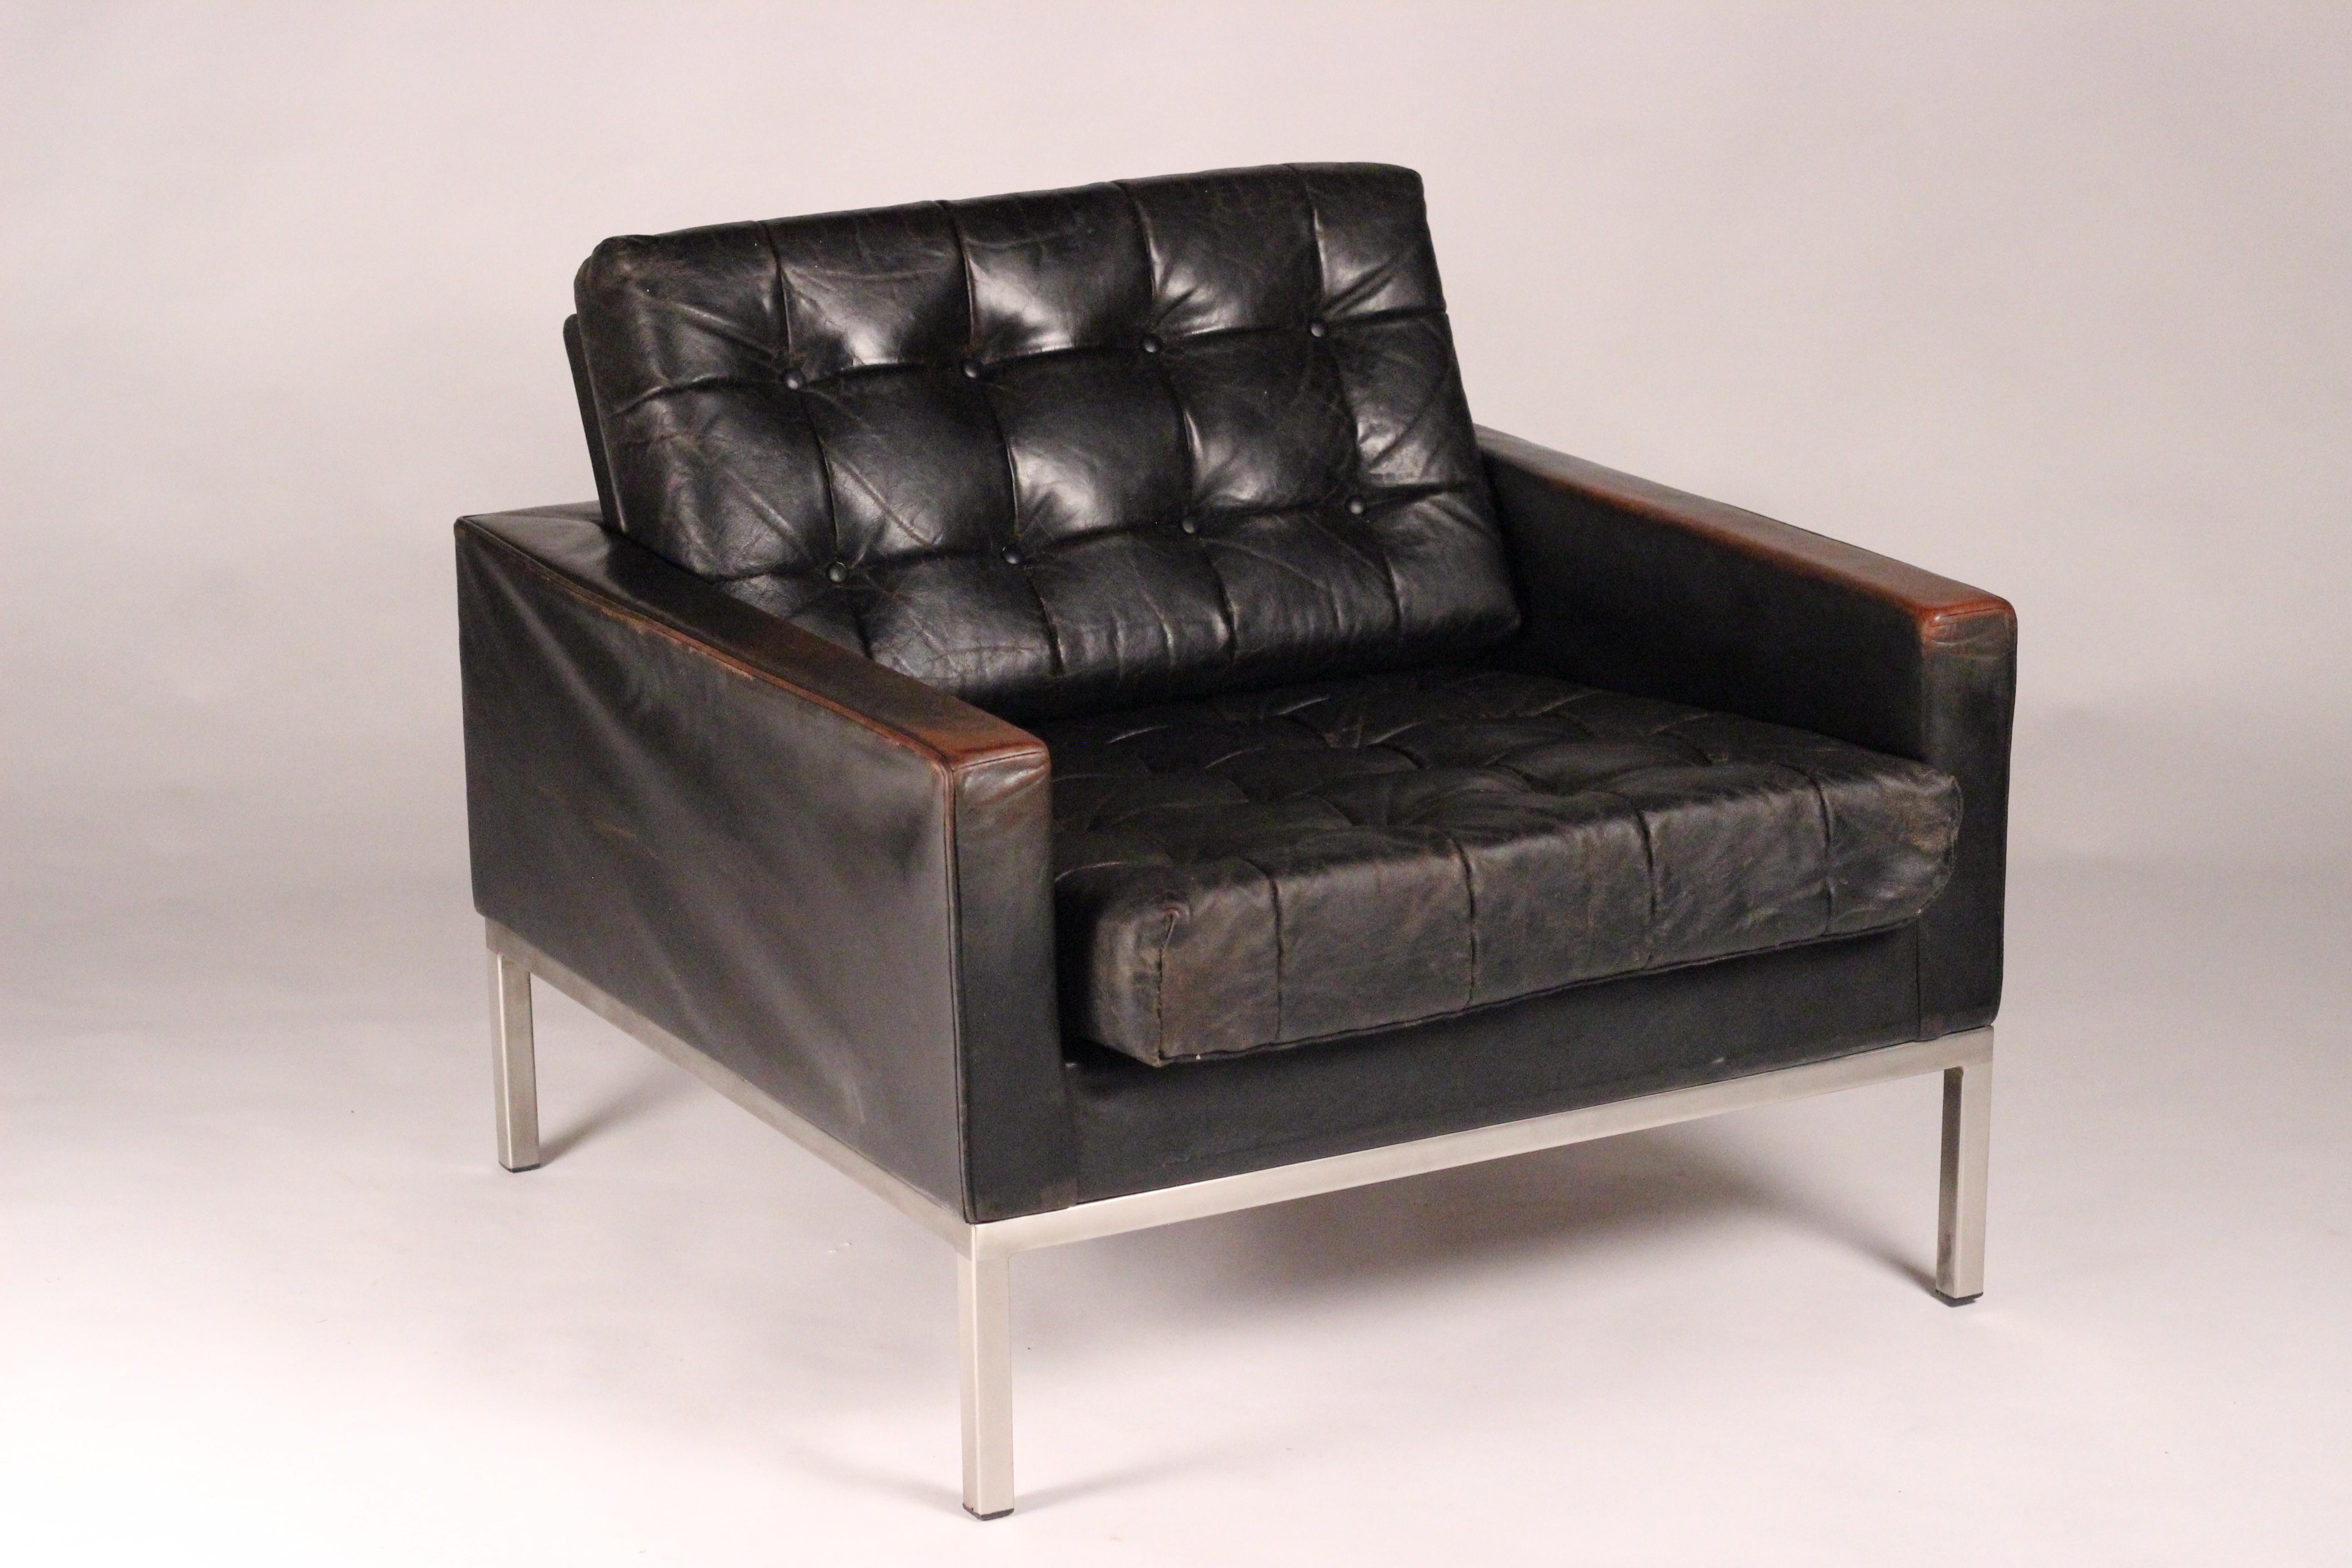 One of a set of 3 club chairs designed by Robin Day in 1962 that we currently have in stock. Robin Day designed the Club as a modern take on the Classic Chesterfield and it became Britain’s original ‘cube sofa’. The Club was designed to fit in both